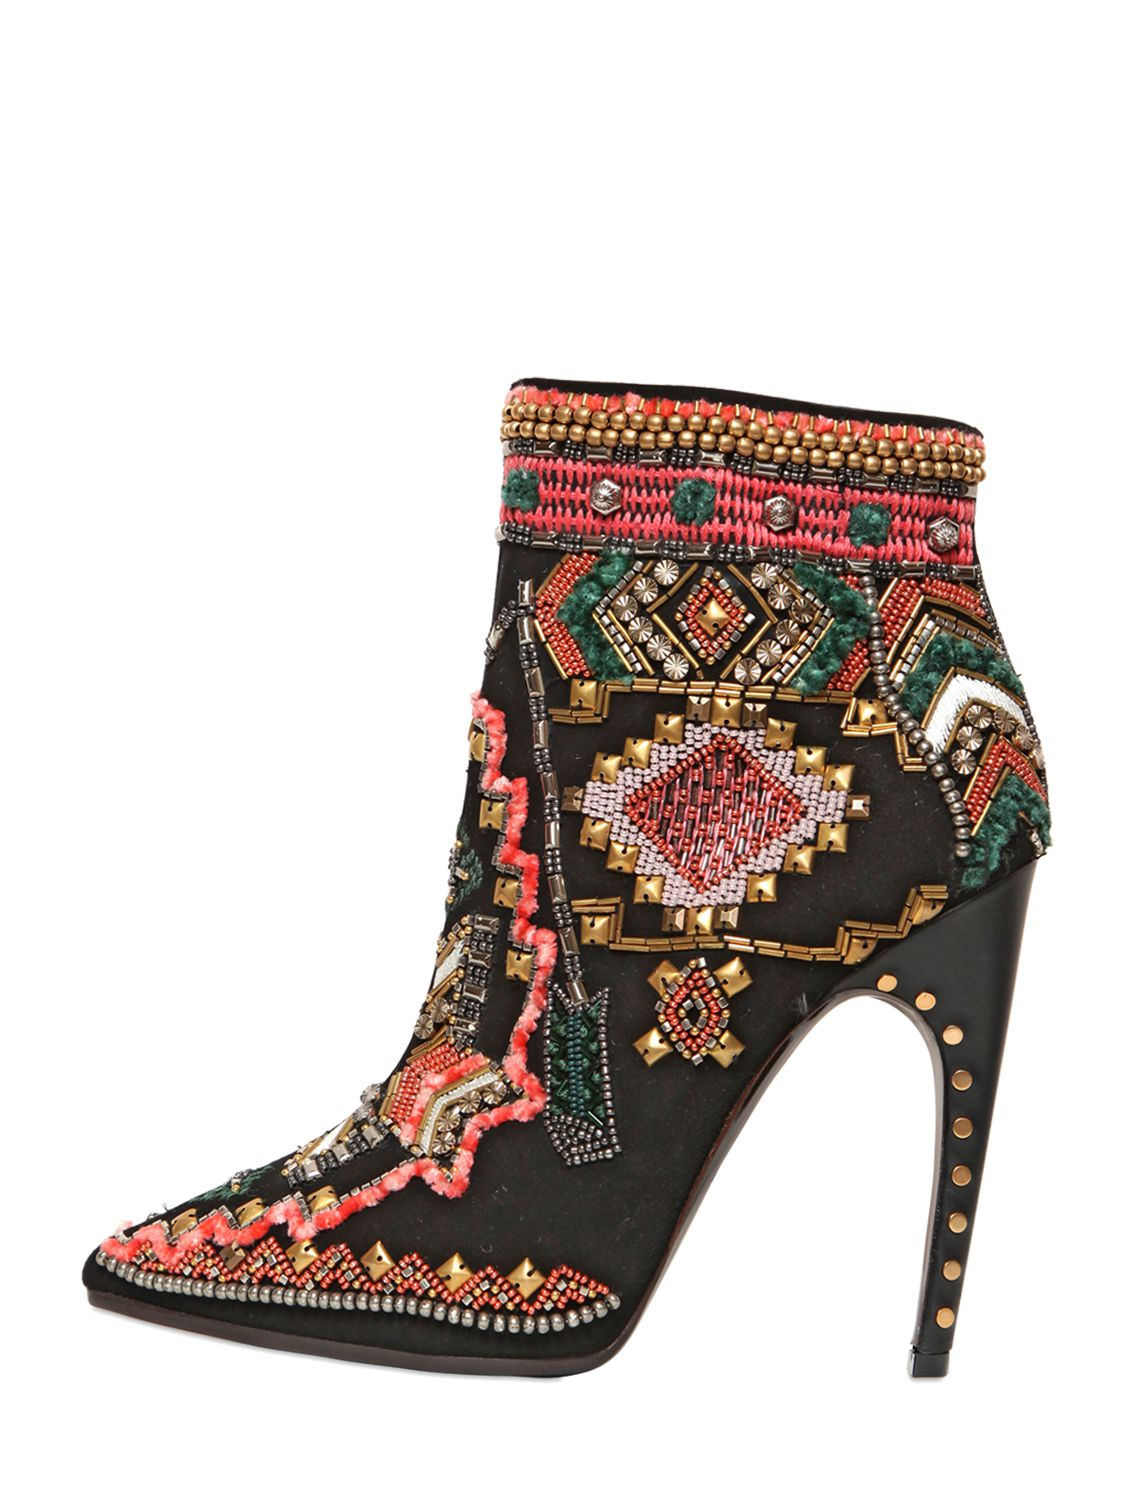 Lyst - Emilio Pucci 115mm Suede Embroidered Ankle Boots